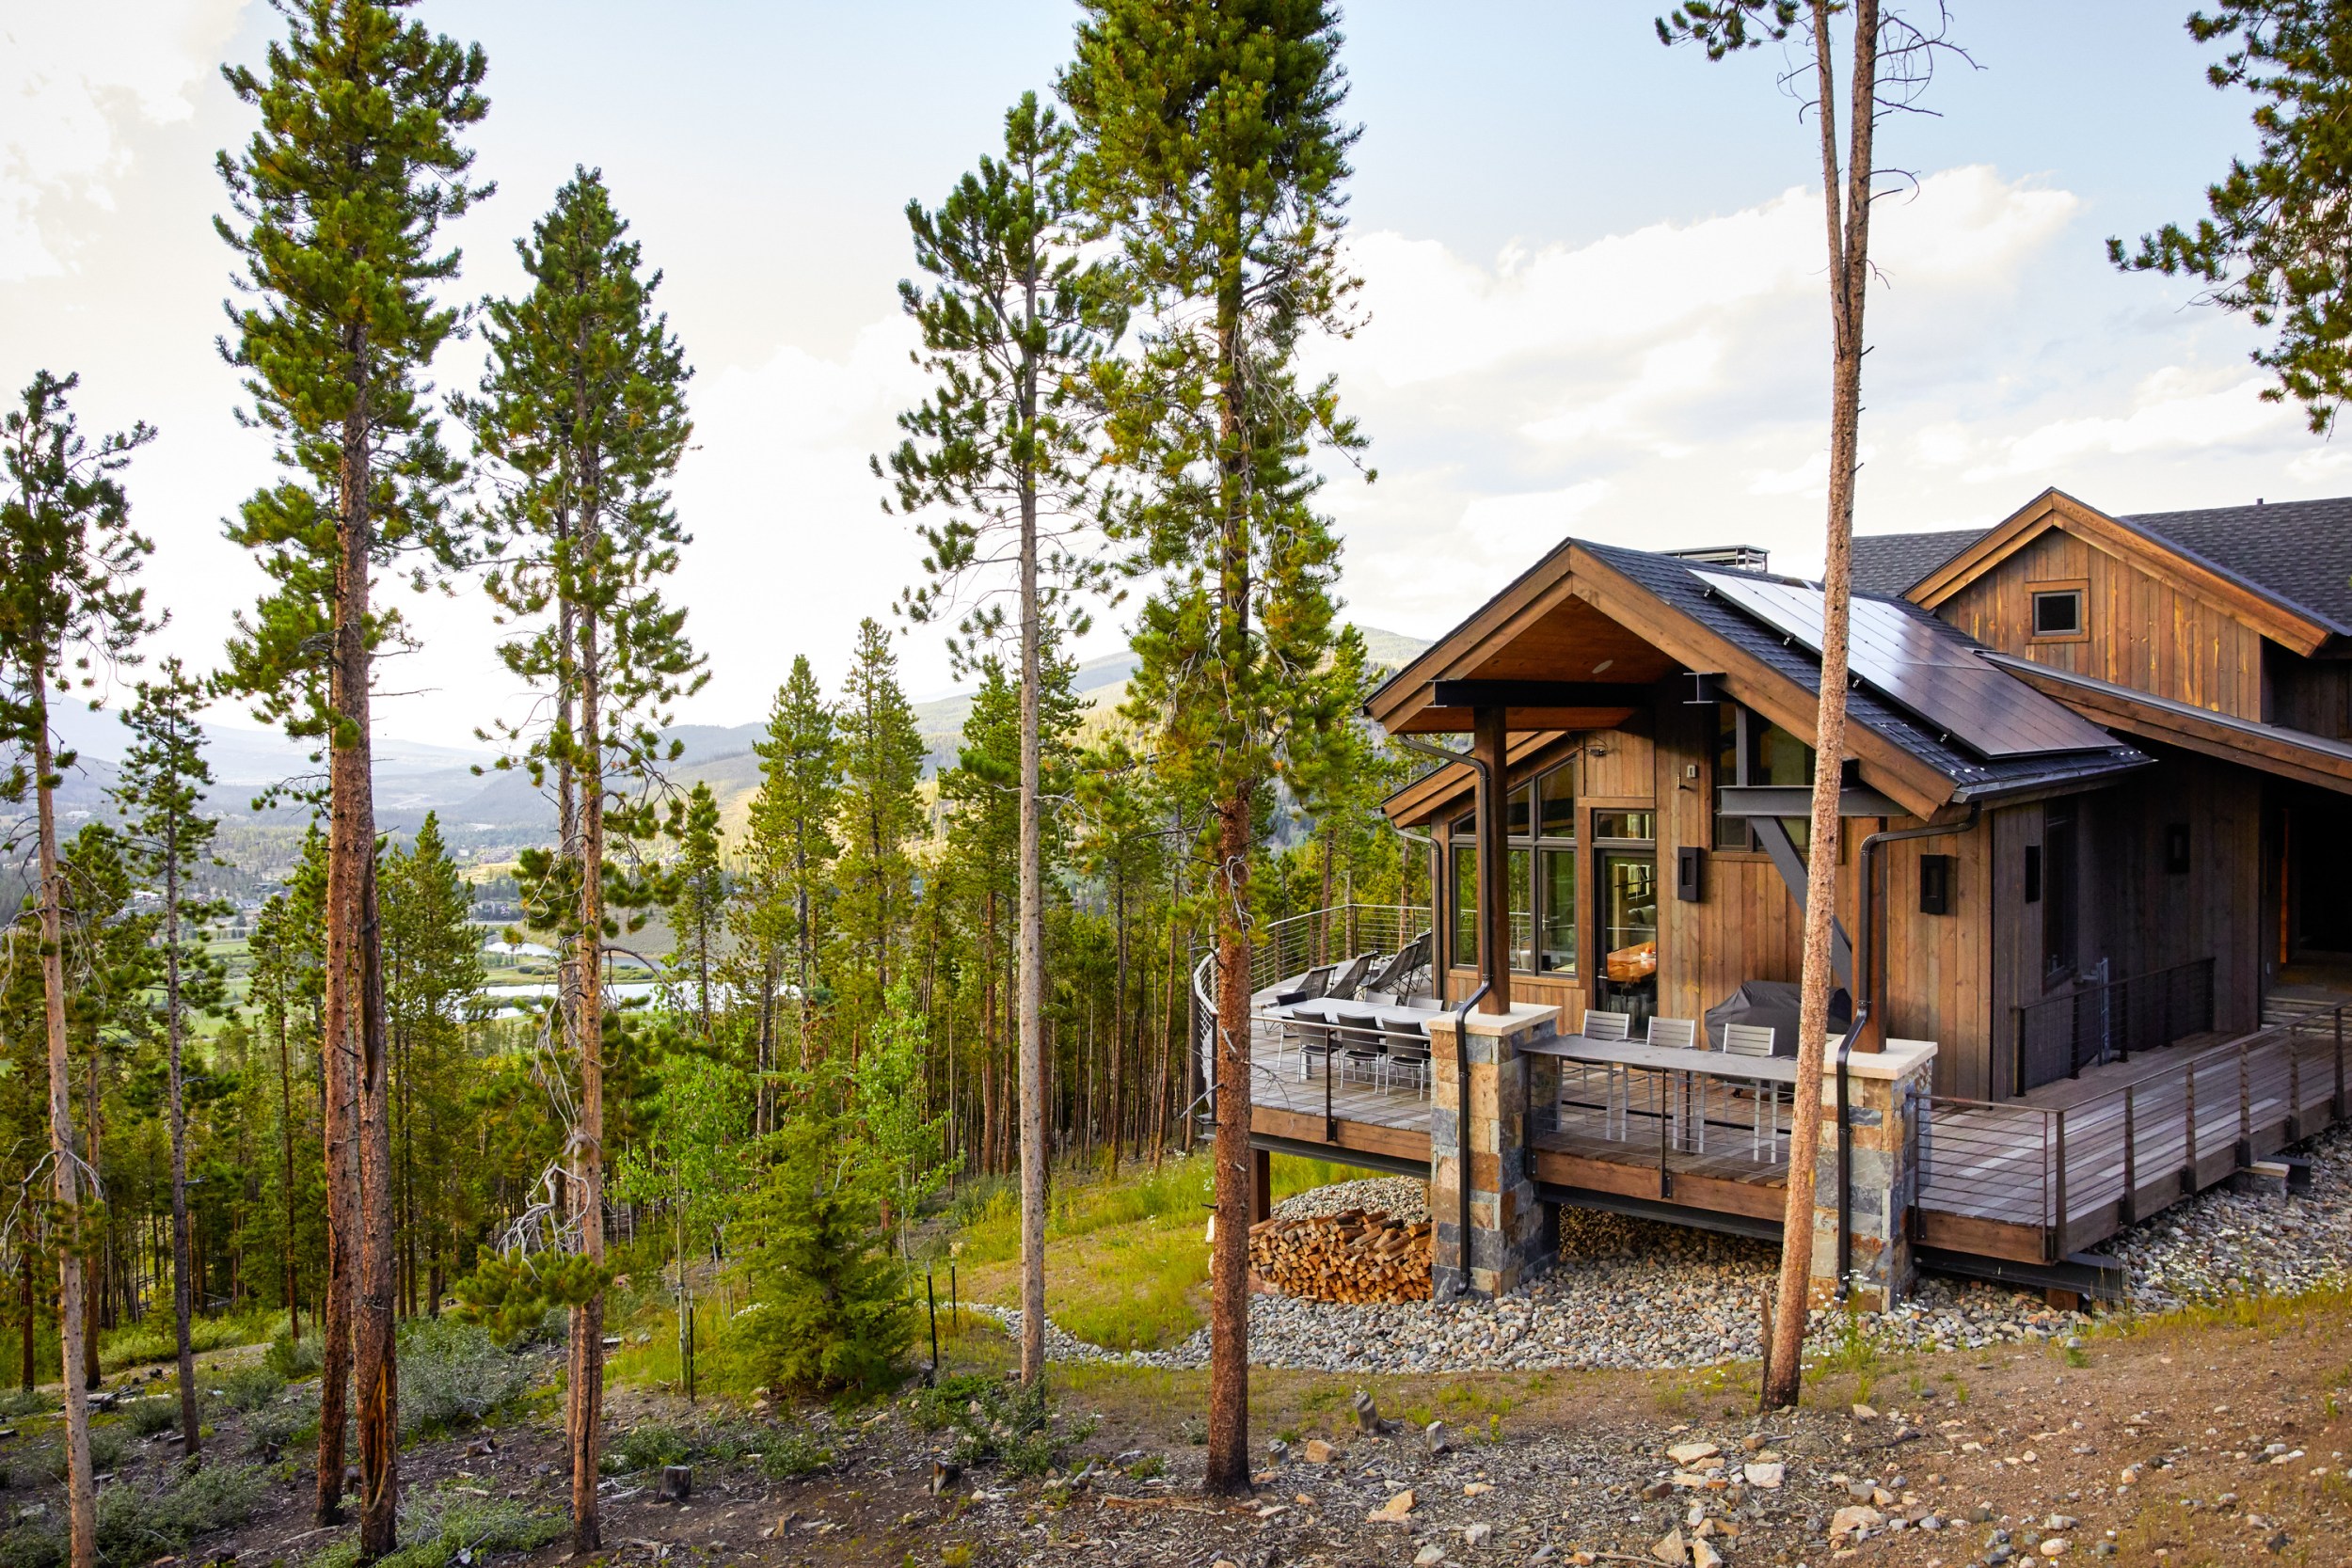 Breckenridge cabin surrounded by trees and mountains